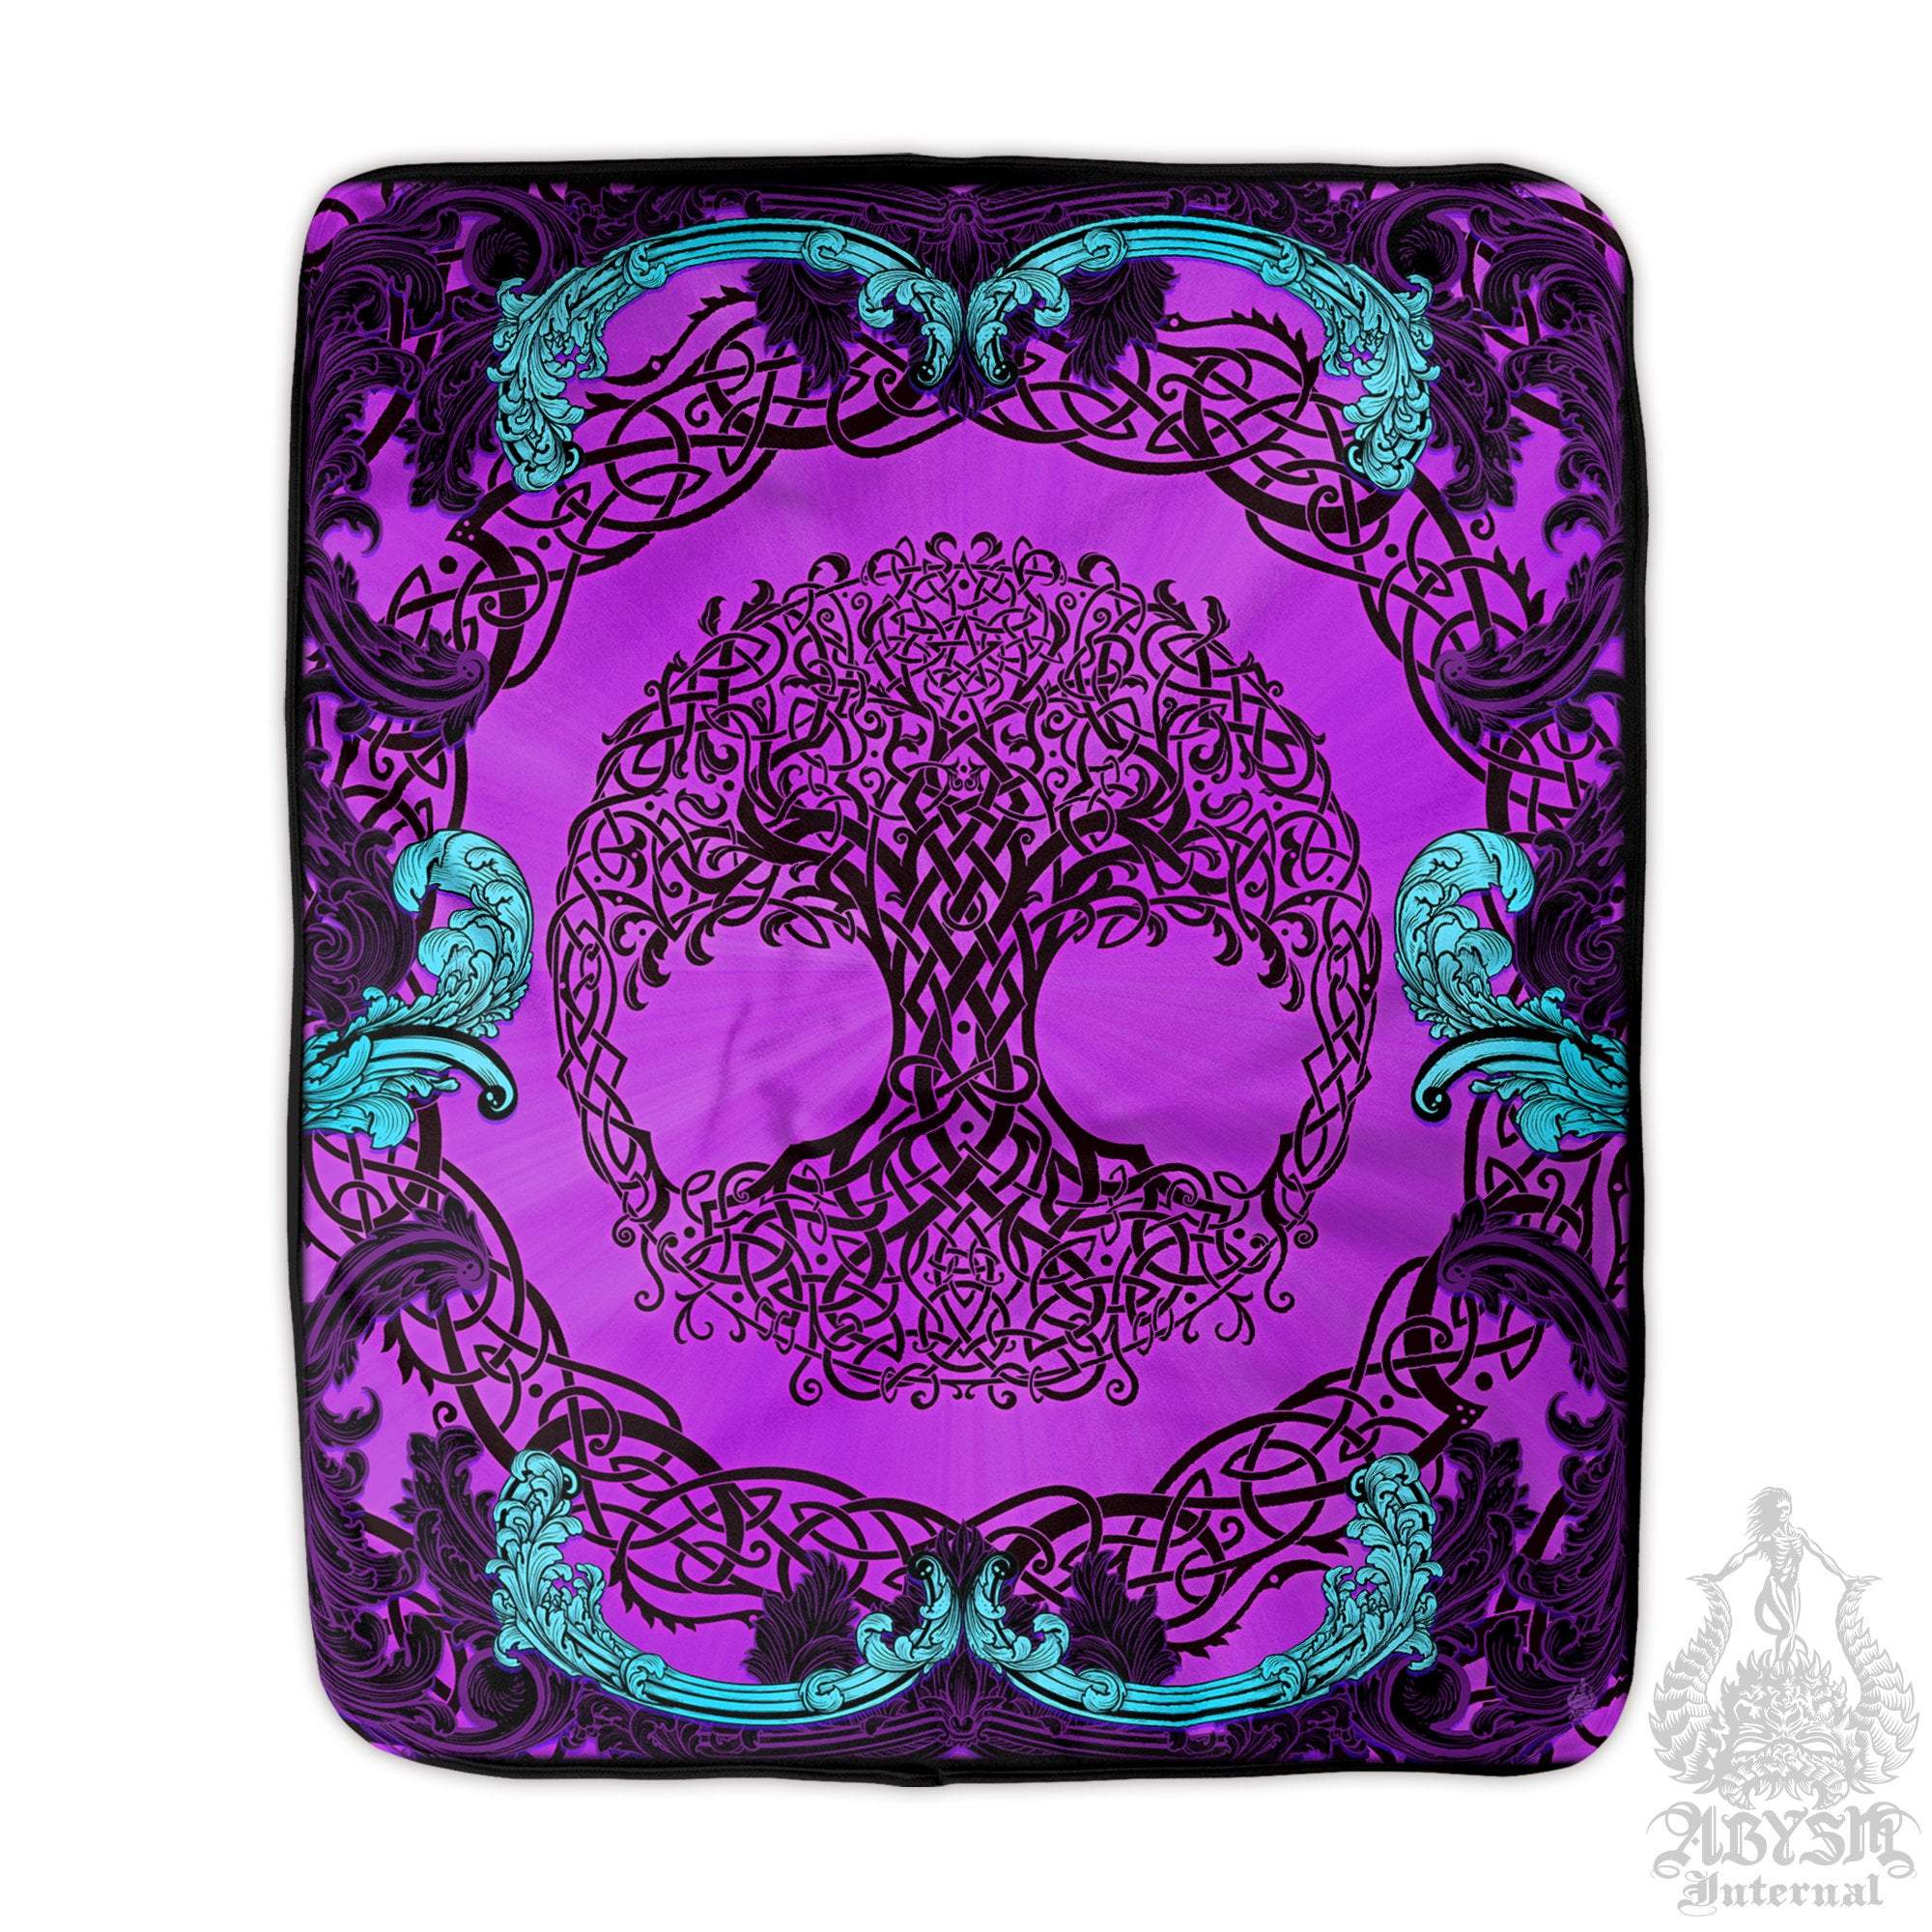 Tree of Life Throw Fleece Blanket, Pagan Decor, Celtic Knot, Witch Room, Witchy, Alternative Art Gift - Pastel Goth - Abysm Internal